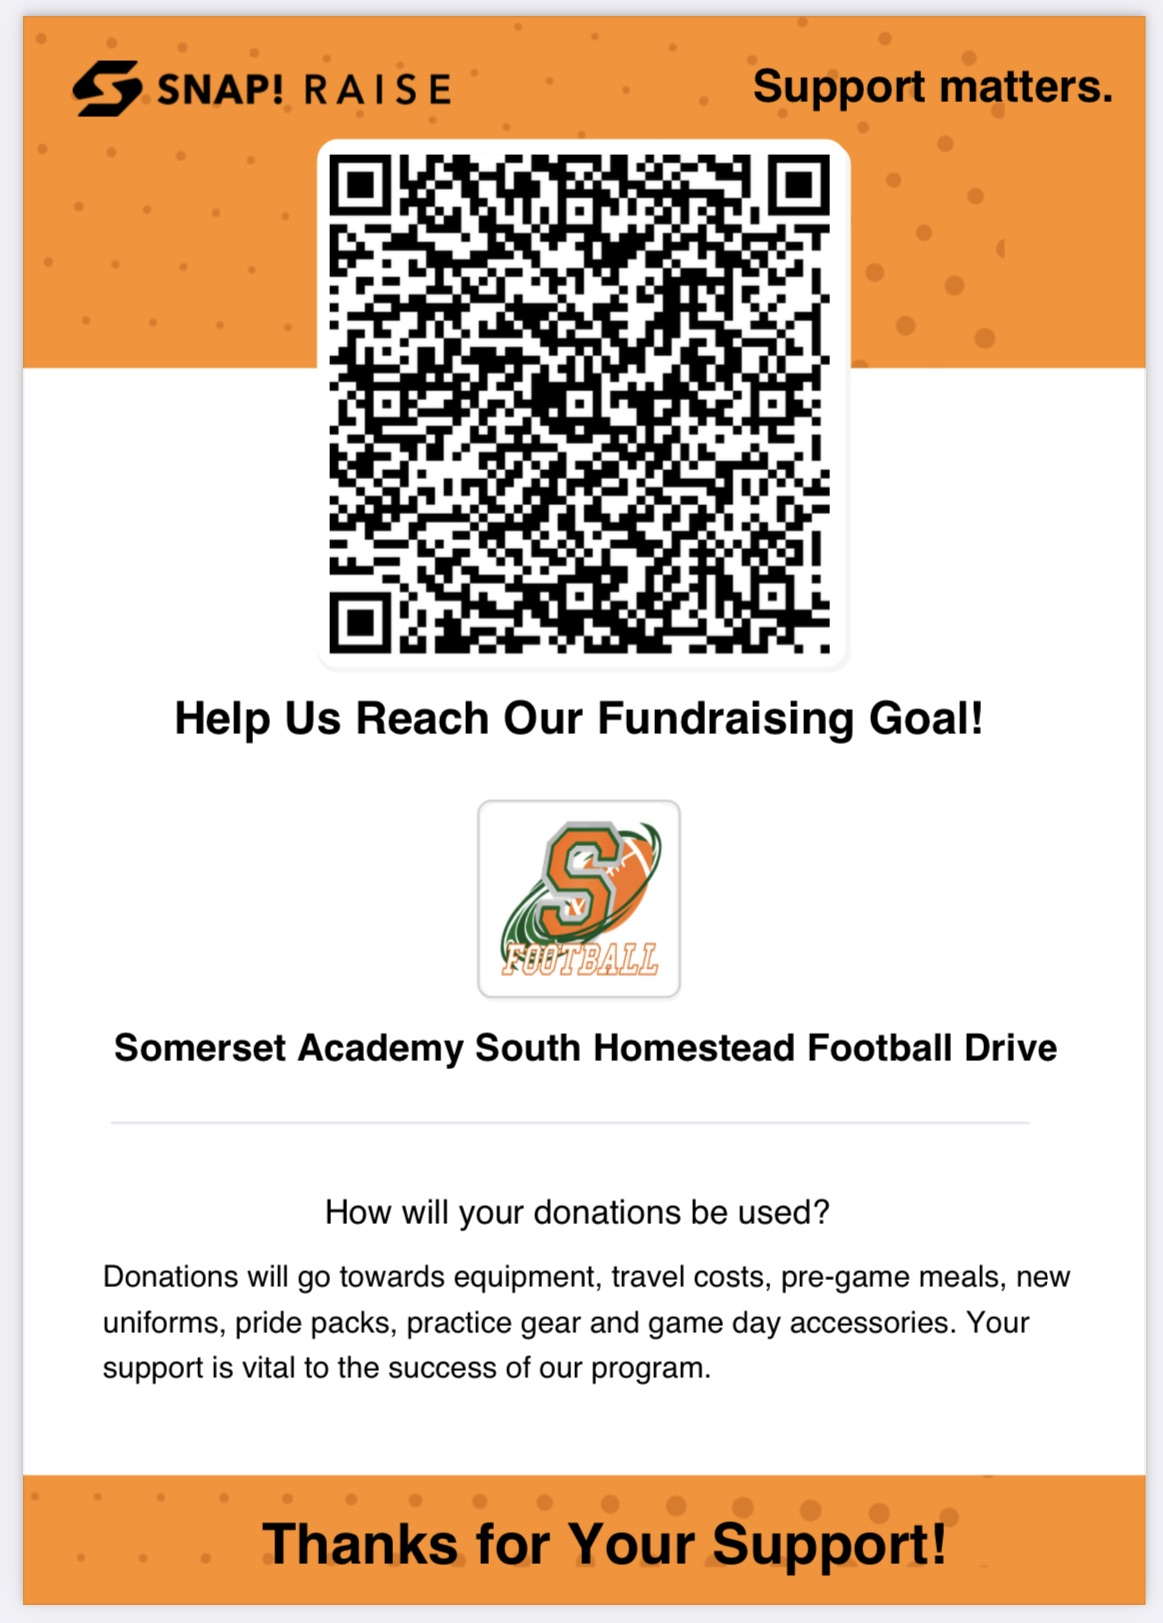 Supporting Somerset Academy South Homestead Football Team Fundraiser